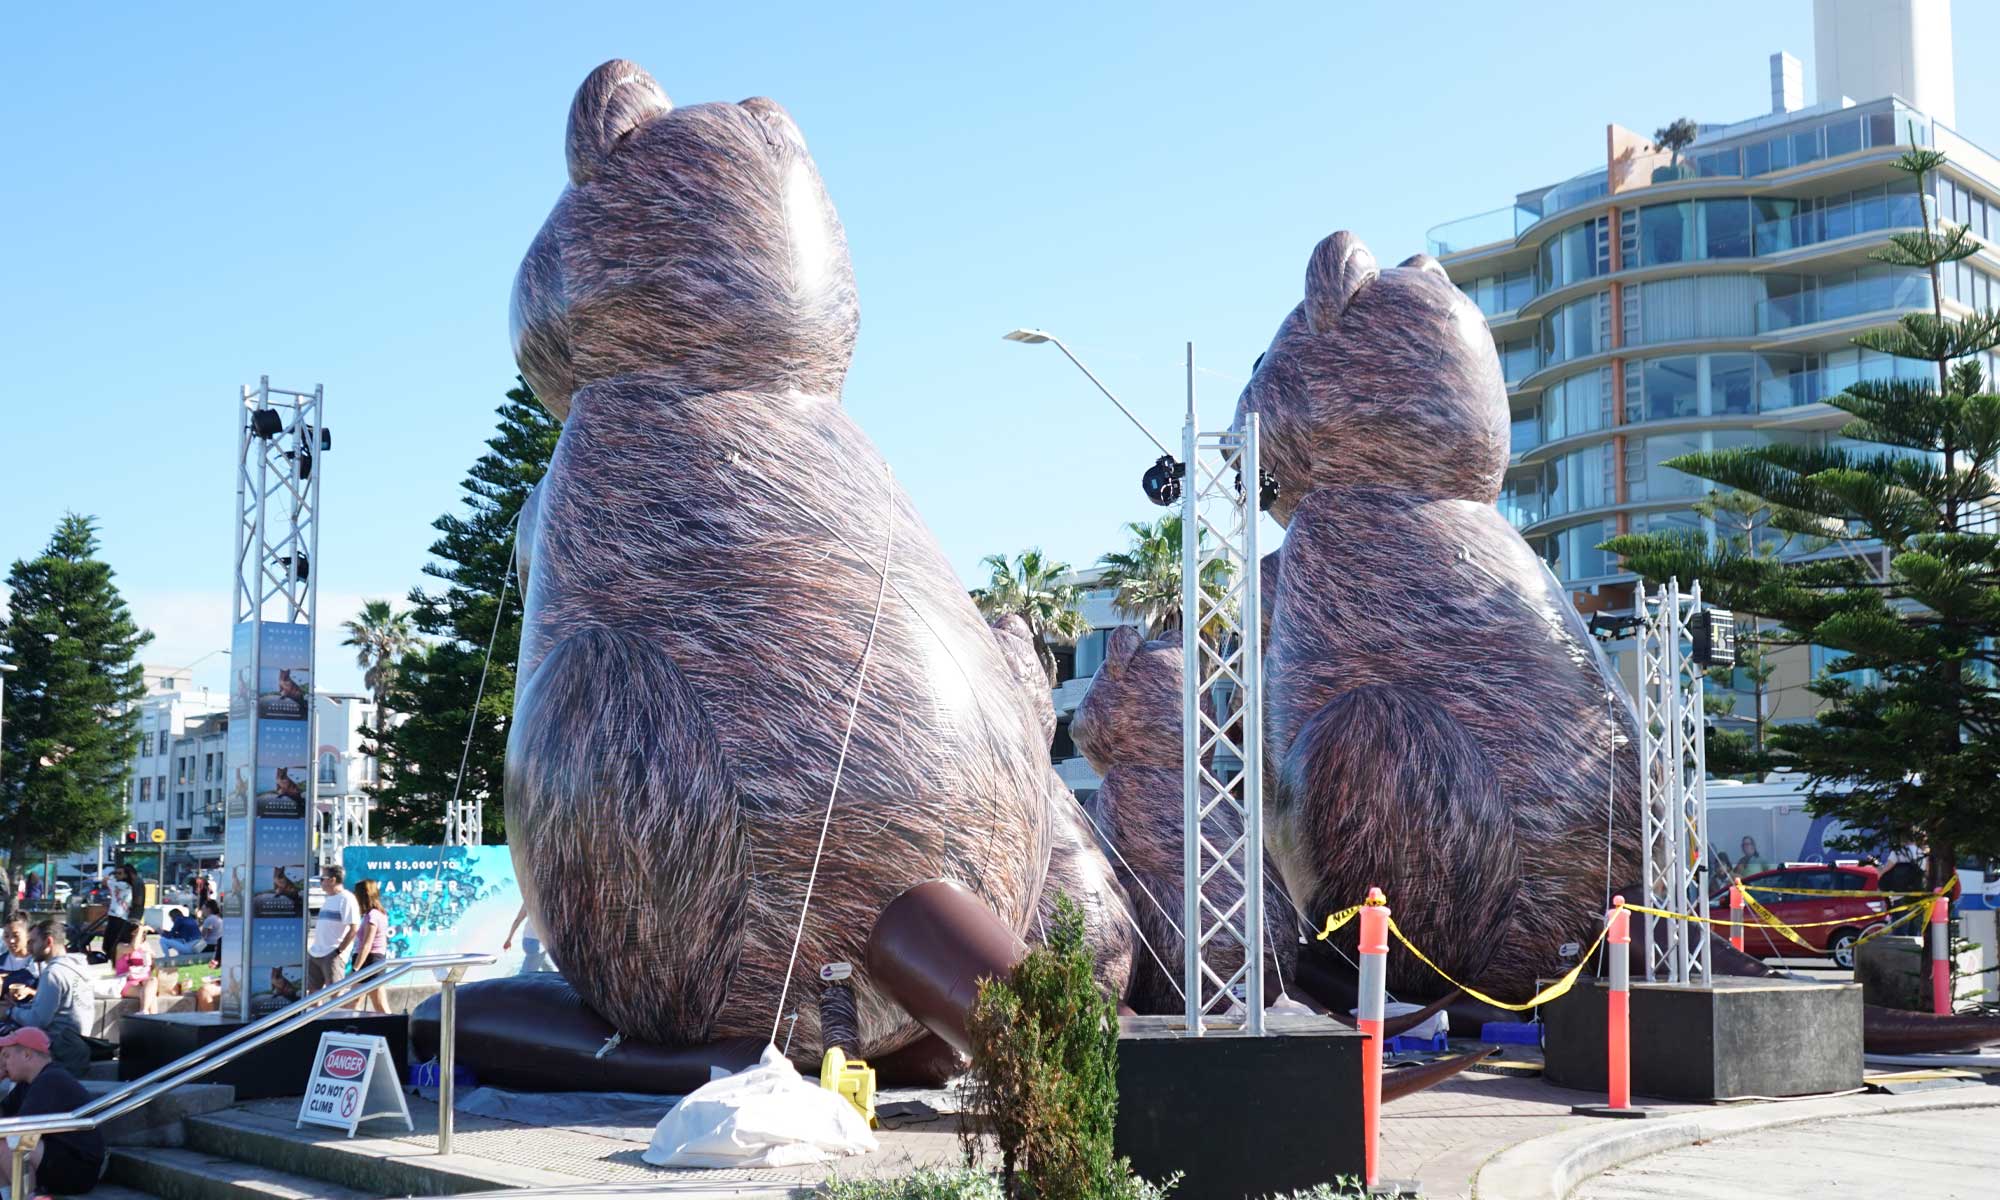 Displayed over a weekend on the Bondi Foreshore, the quokkas successfully brought media attention to the campaign and were widely featured on television, in newspapers, and on social media.